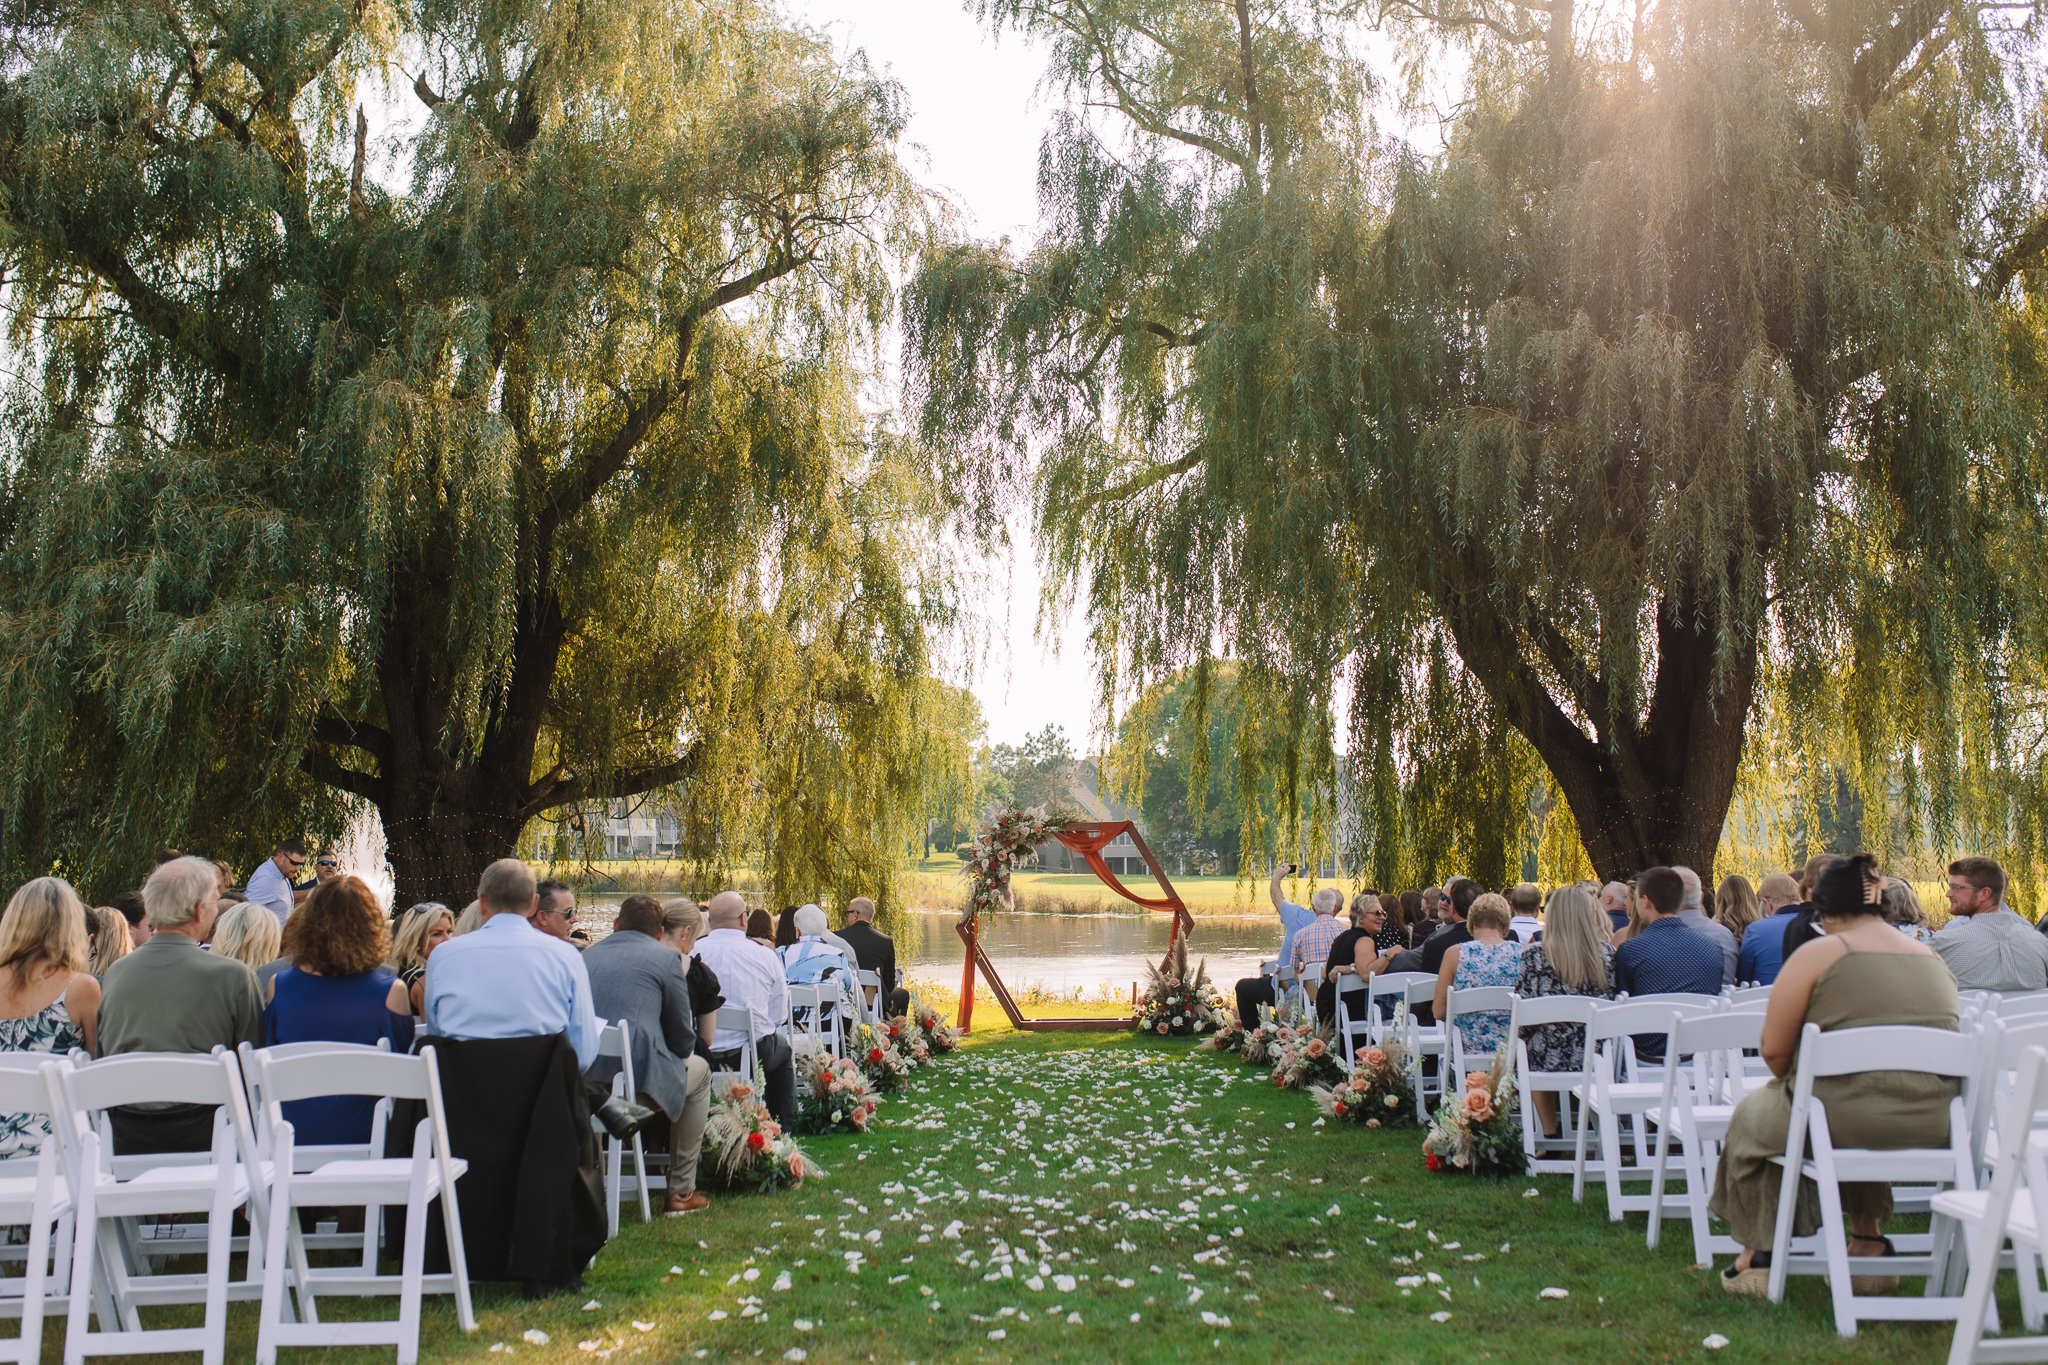 Stunning outdoor ceremony set up between willow trees. The sun shines through the trees and the pond glisters in the background